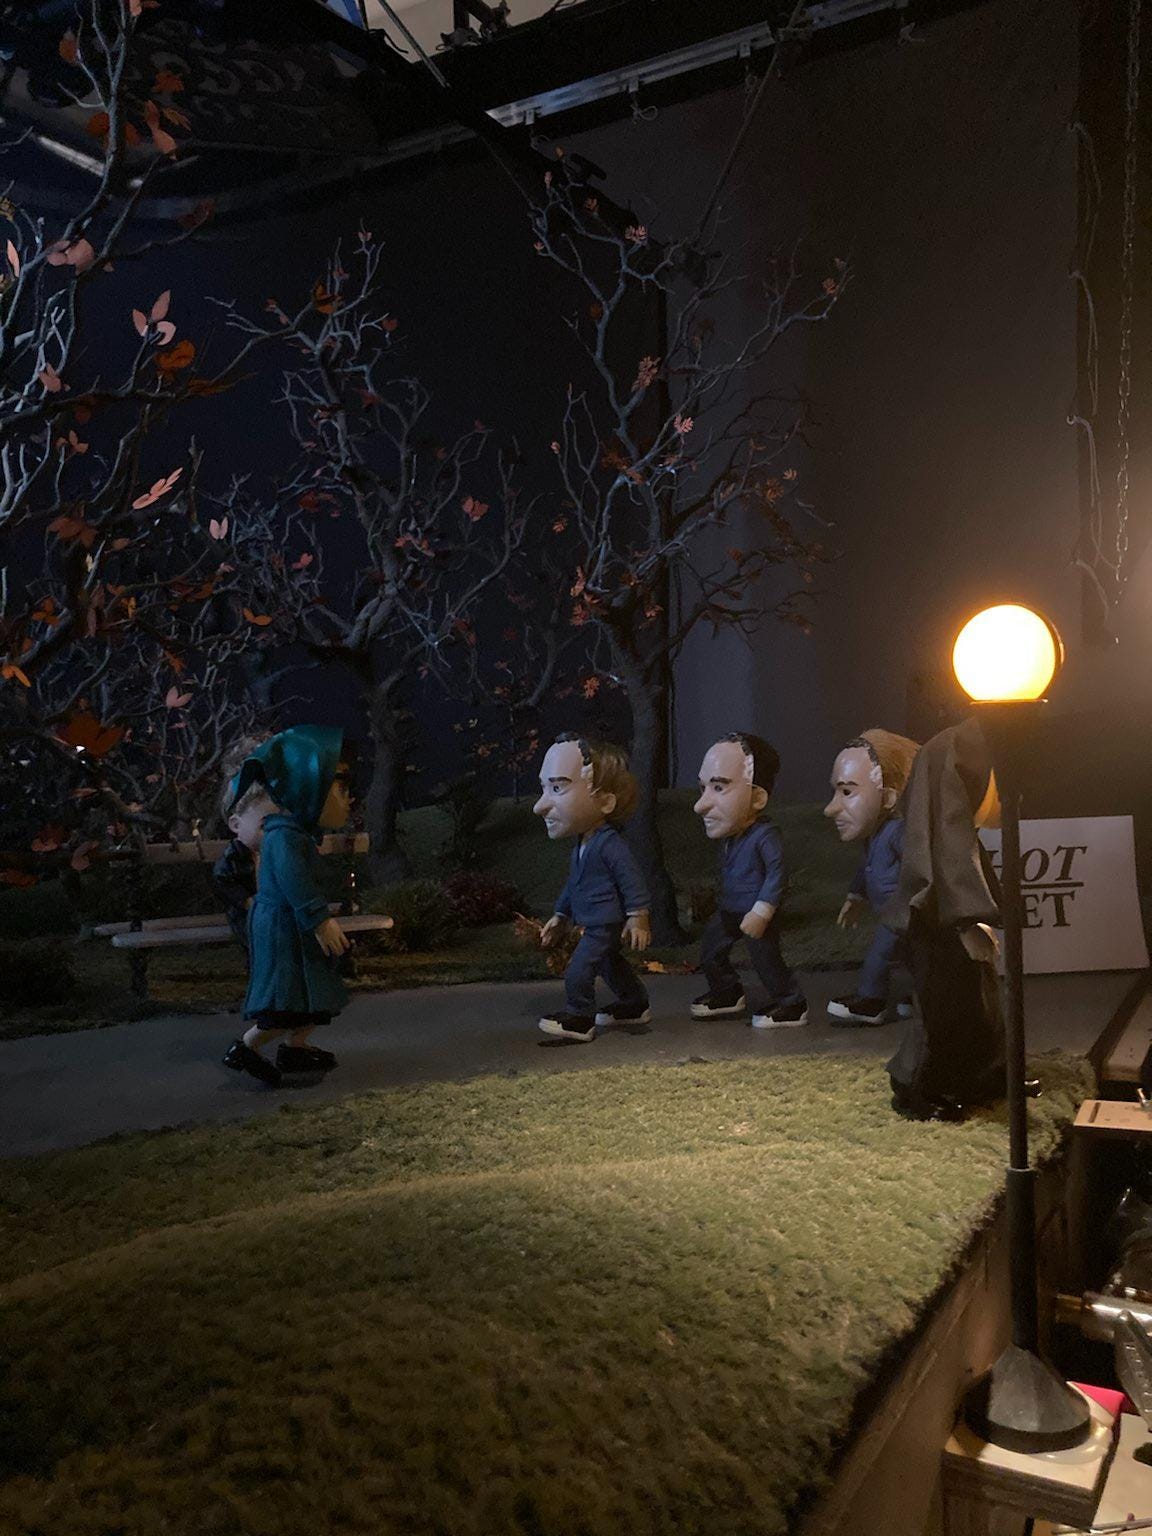 4 puppets are walking in a stop motion miniatrure set modeled after NYC's central park. 3 of the characters have "Nixon masks" on that are super creepy. The 4th character is walking towards the group, she is wearing all teal and sunglasses and looks like she has many secrets under her headwrap.